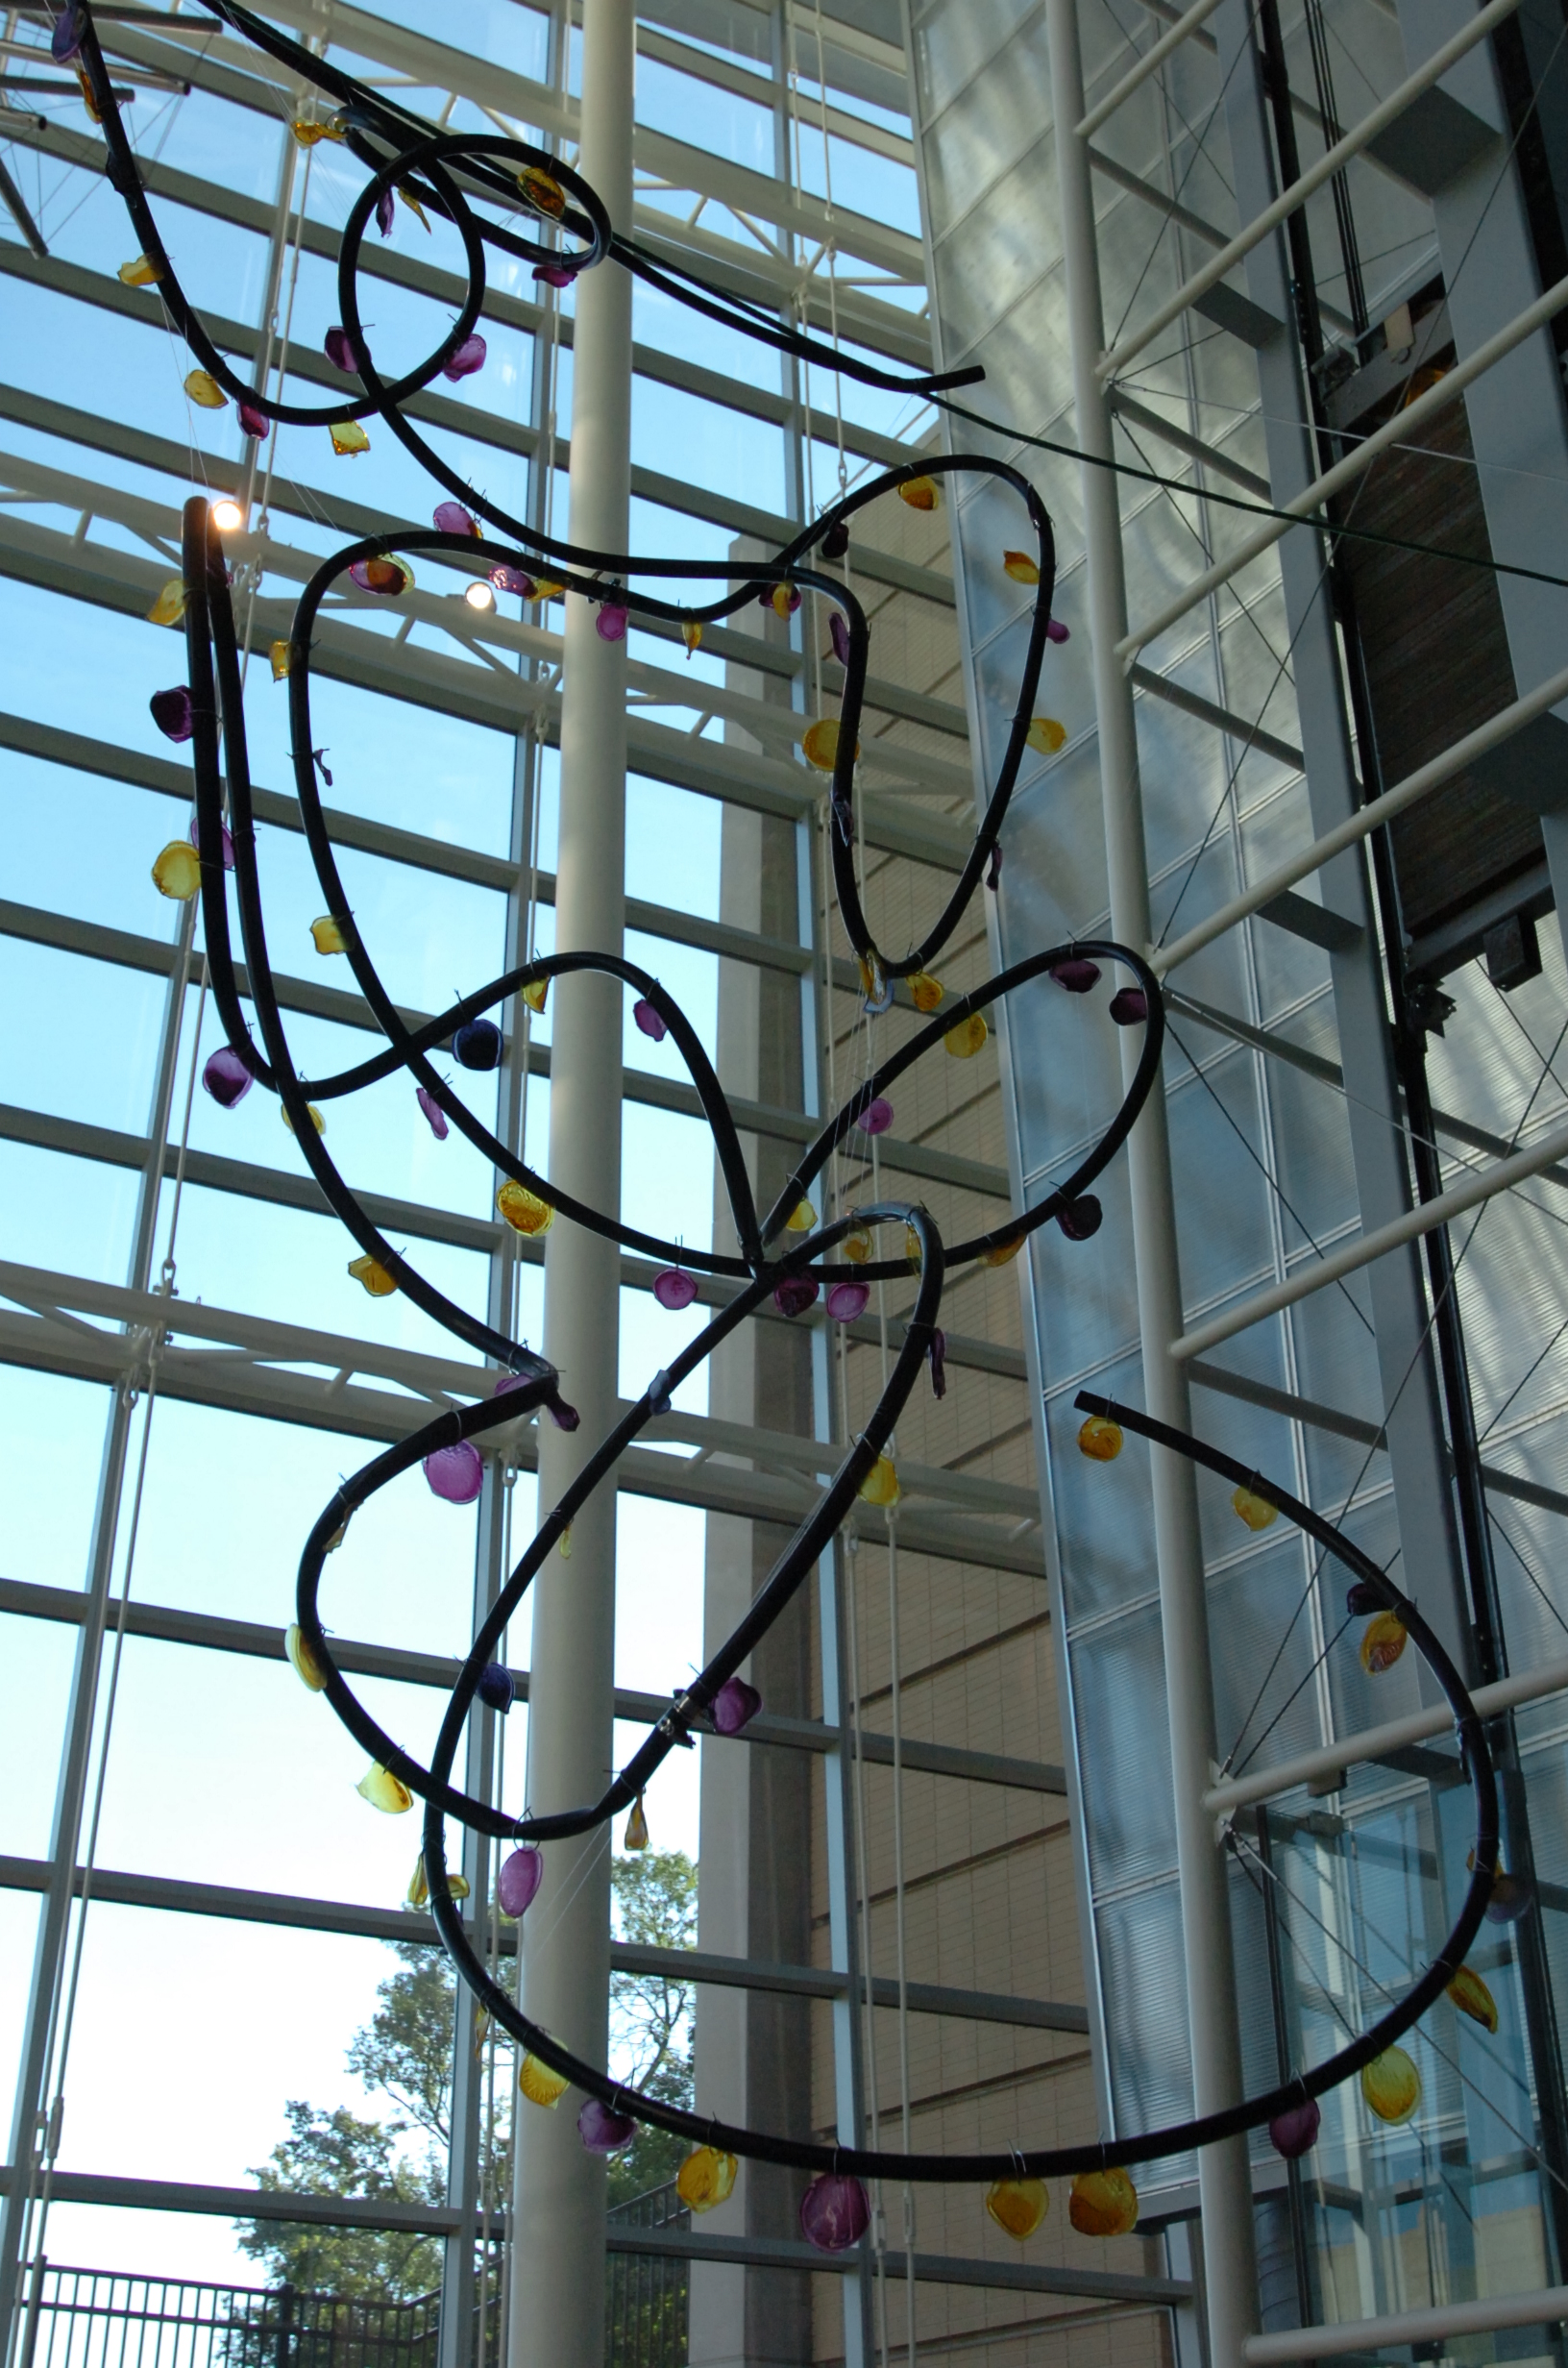 Image of suspended sculpture